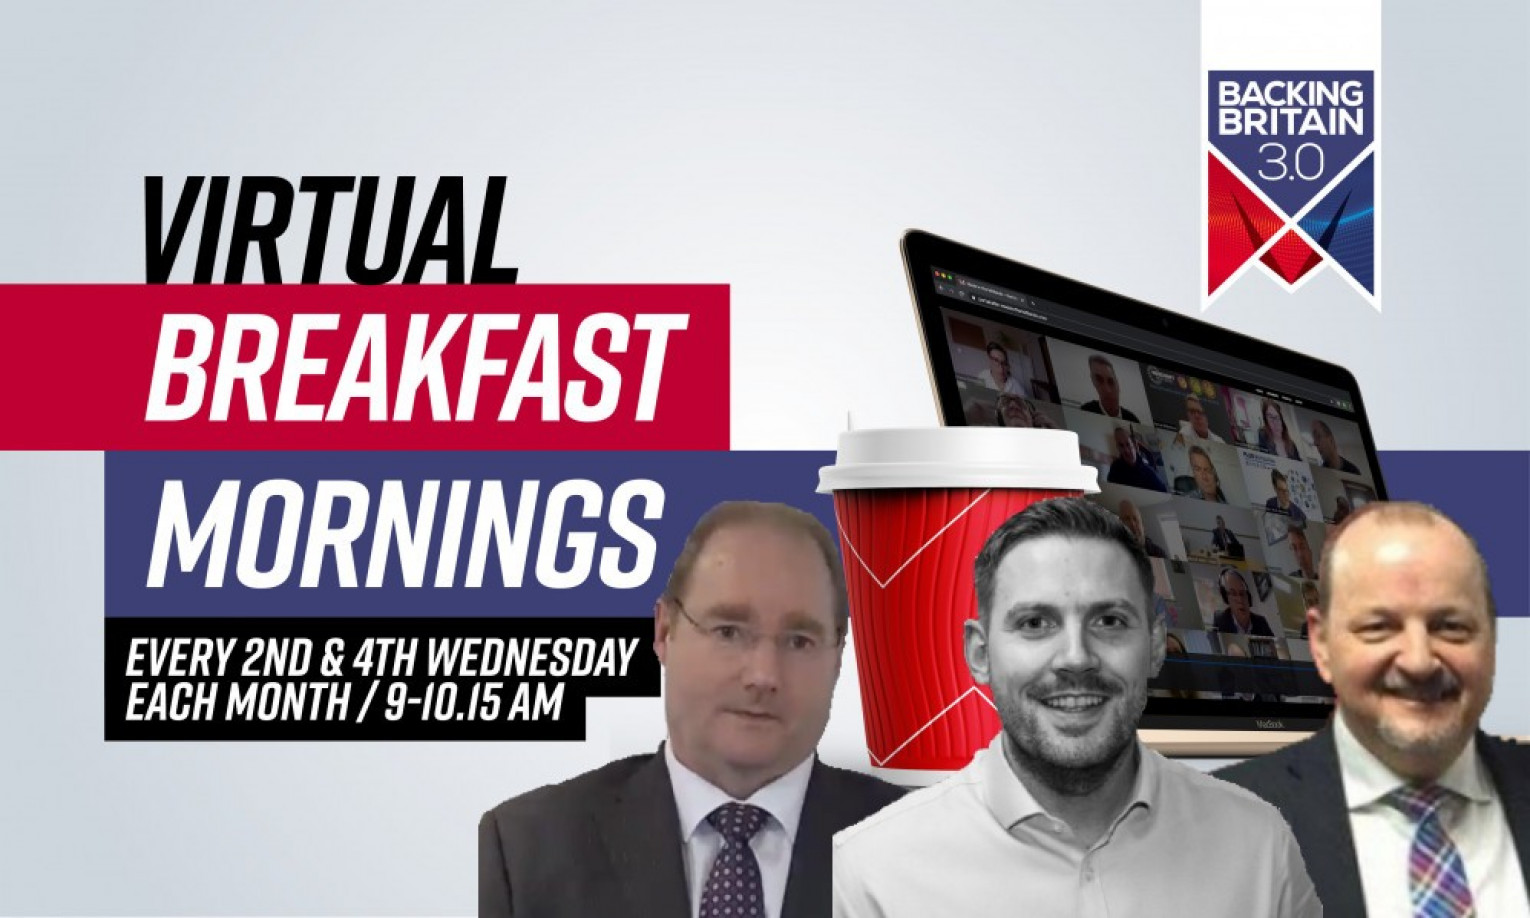 Backing Britain Virtual Breakfast Morning with GSM Valtech, QTS and Wrekin Sheet Metal